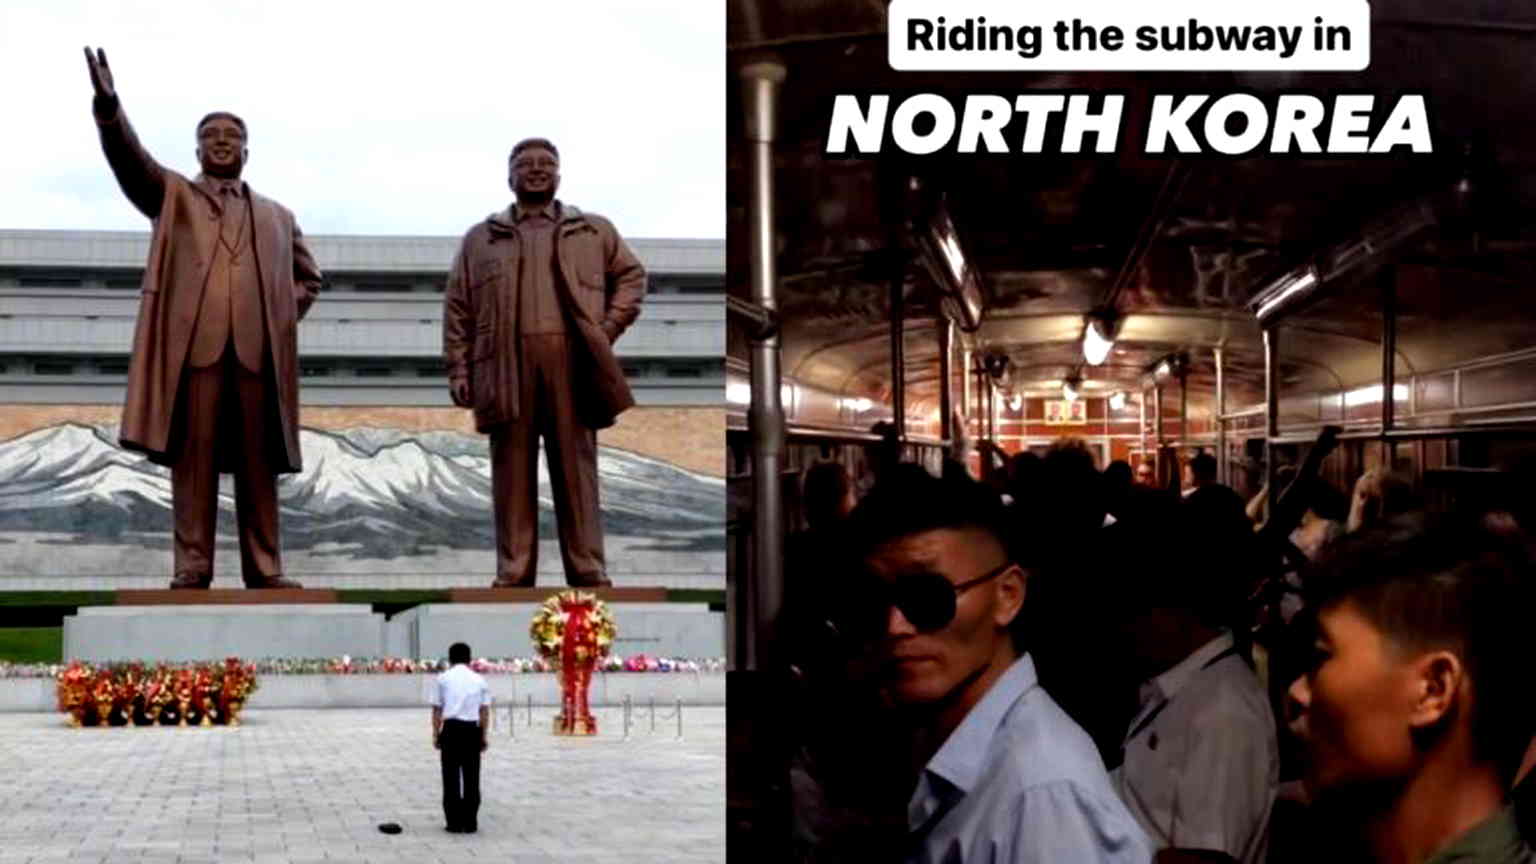 Viral video depicts eerie atmosphere of North Korea’s subway system